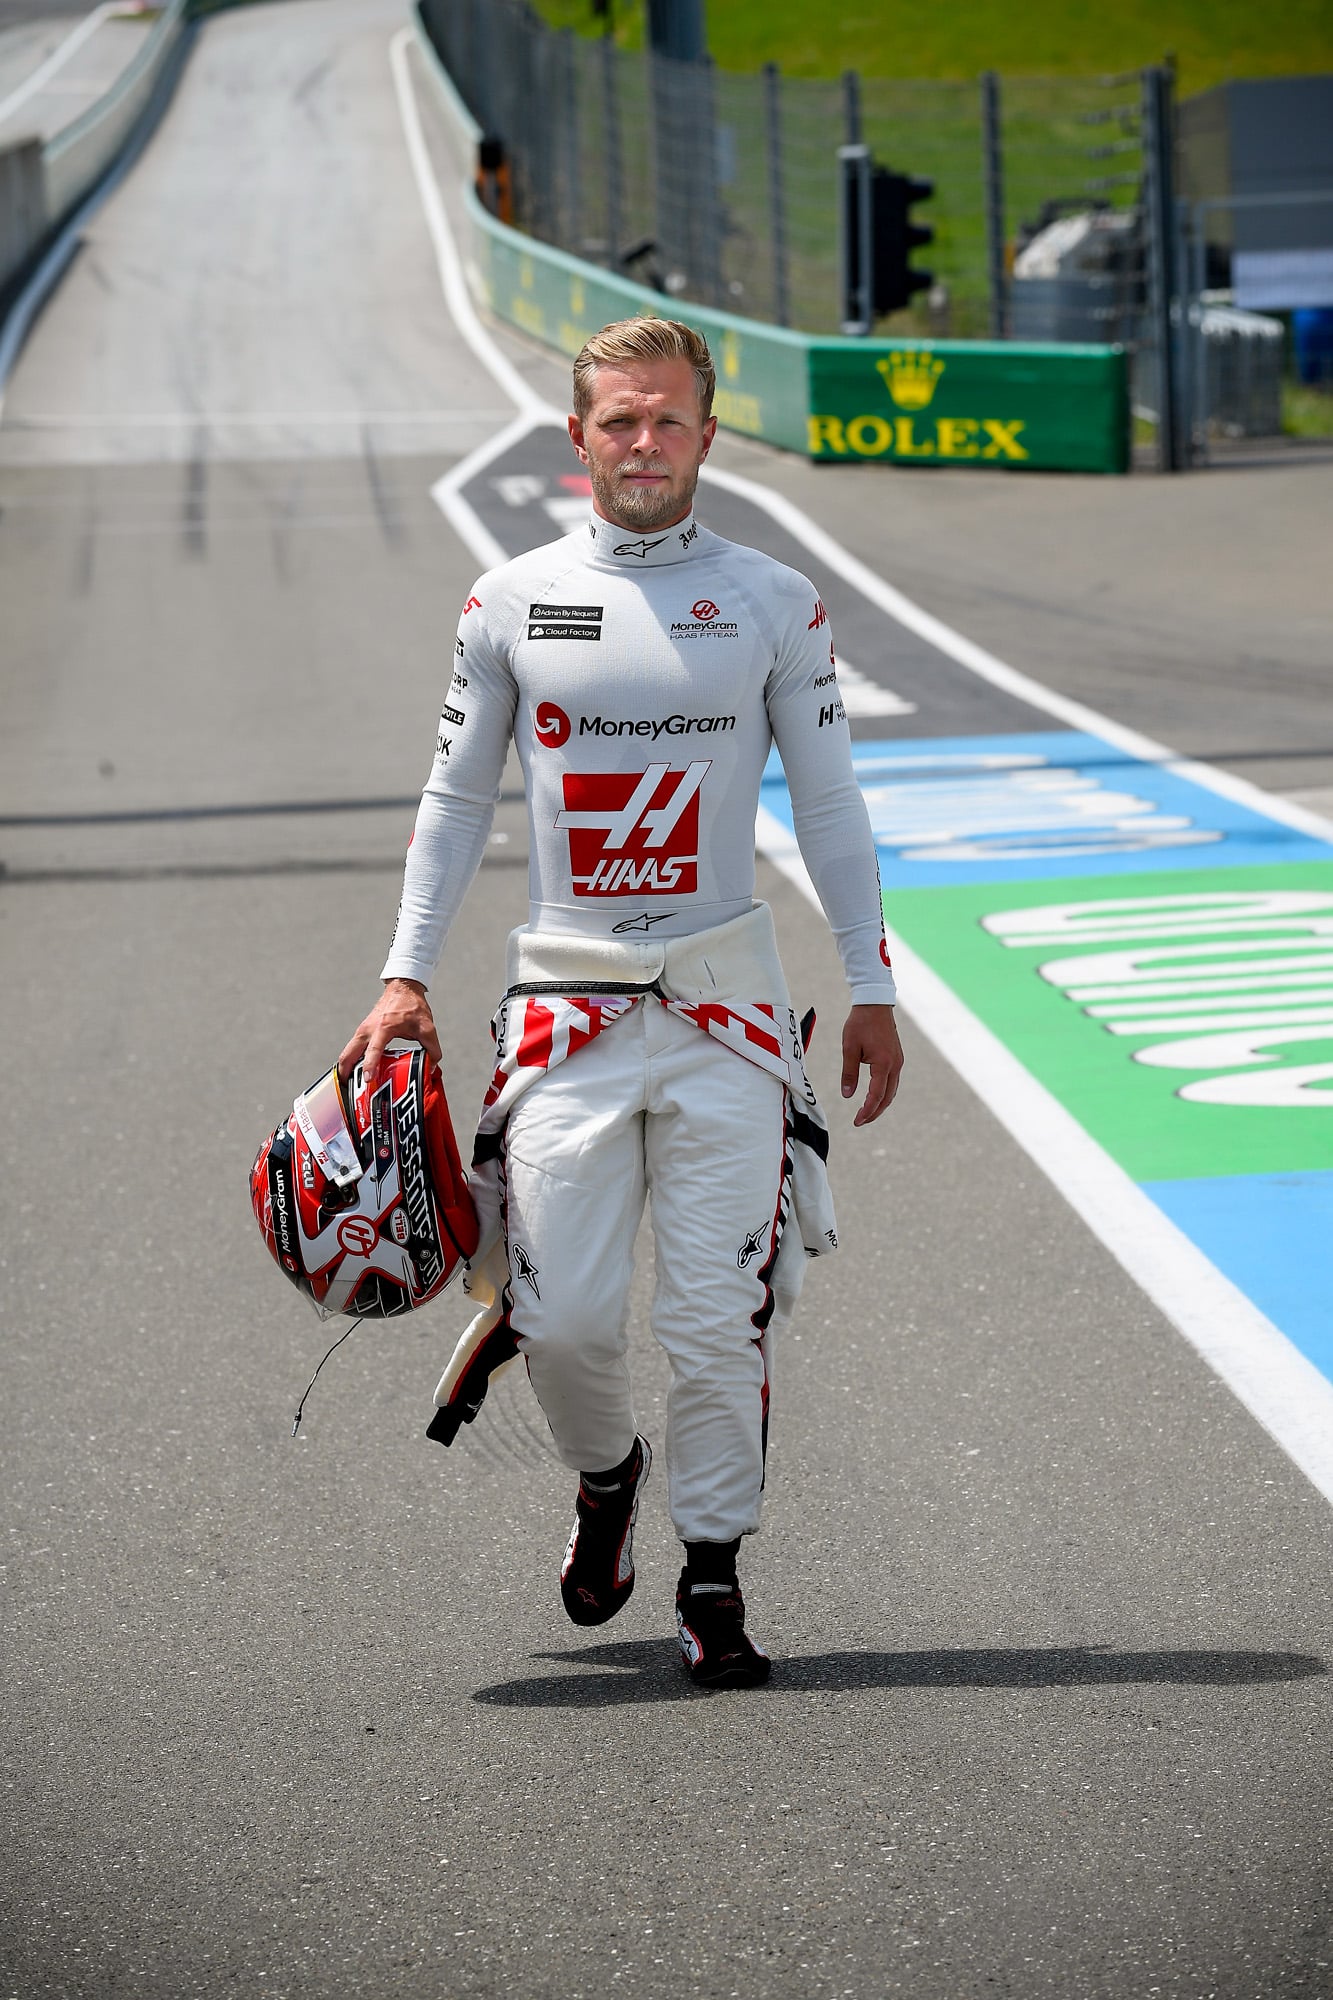 Admin by request sponsored kevin magnussen (haas-ferrari) before the 2023 austrian grand prix at the red bull ring in spielberg » admin by request » admin by request